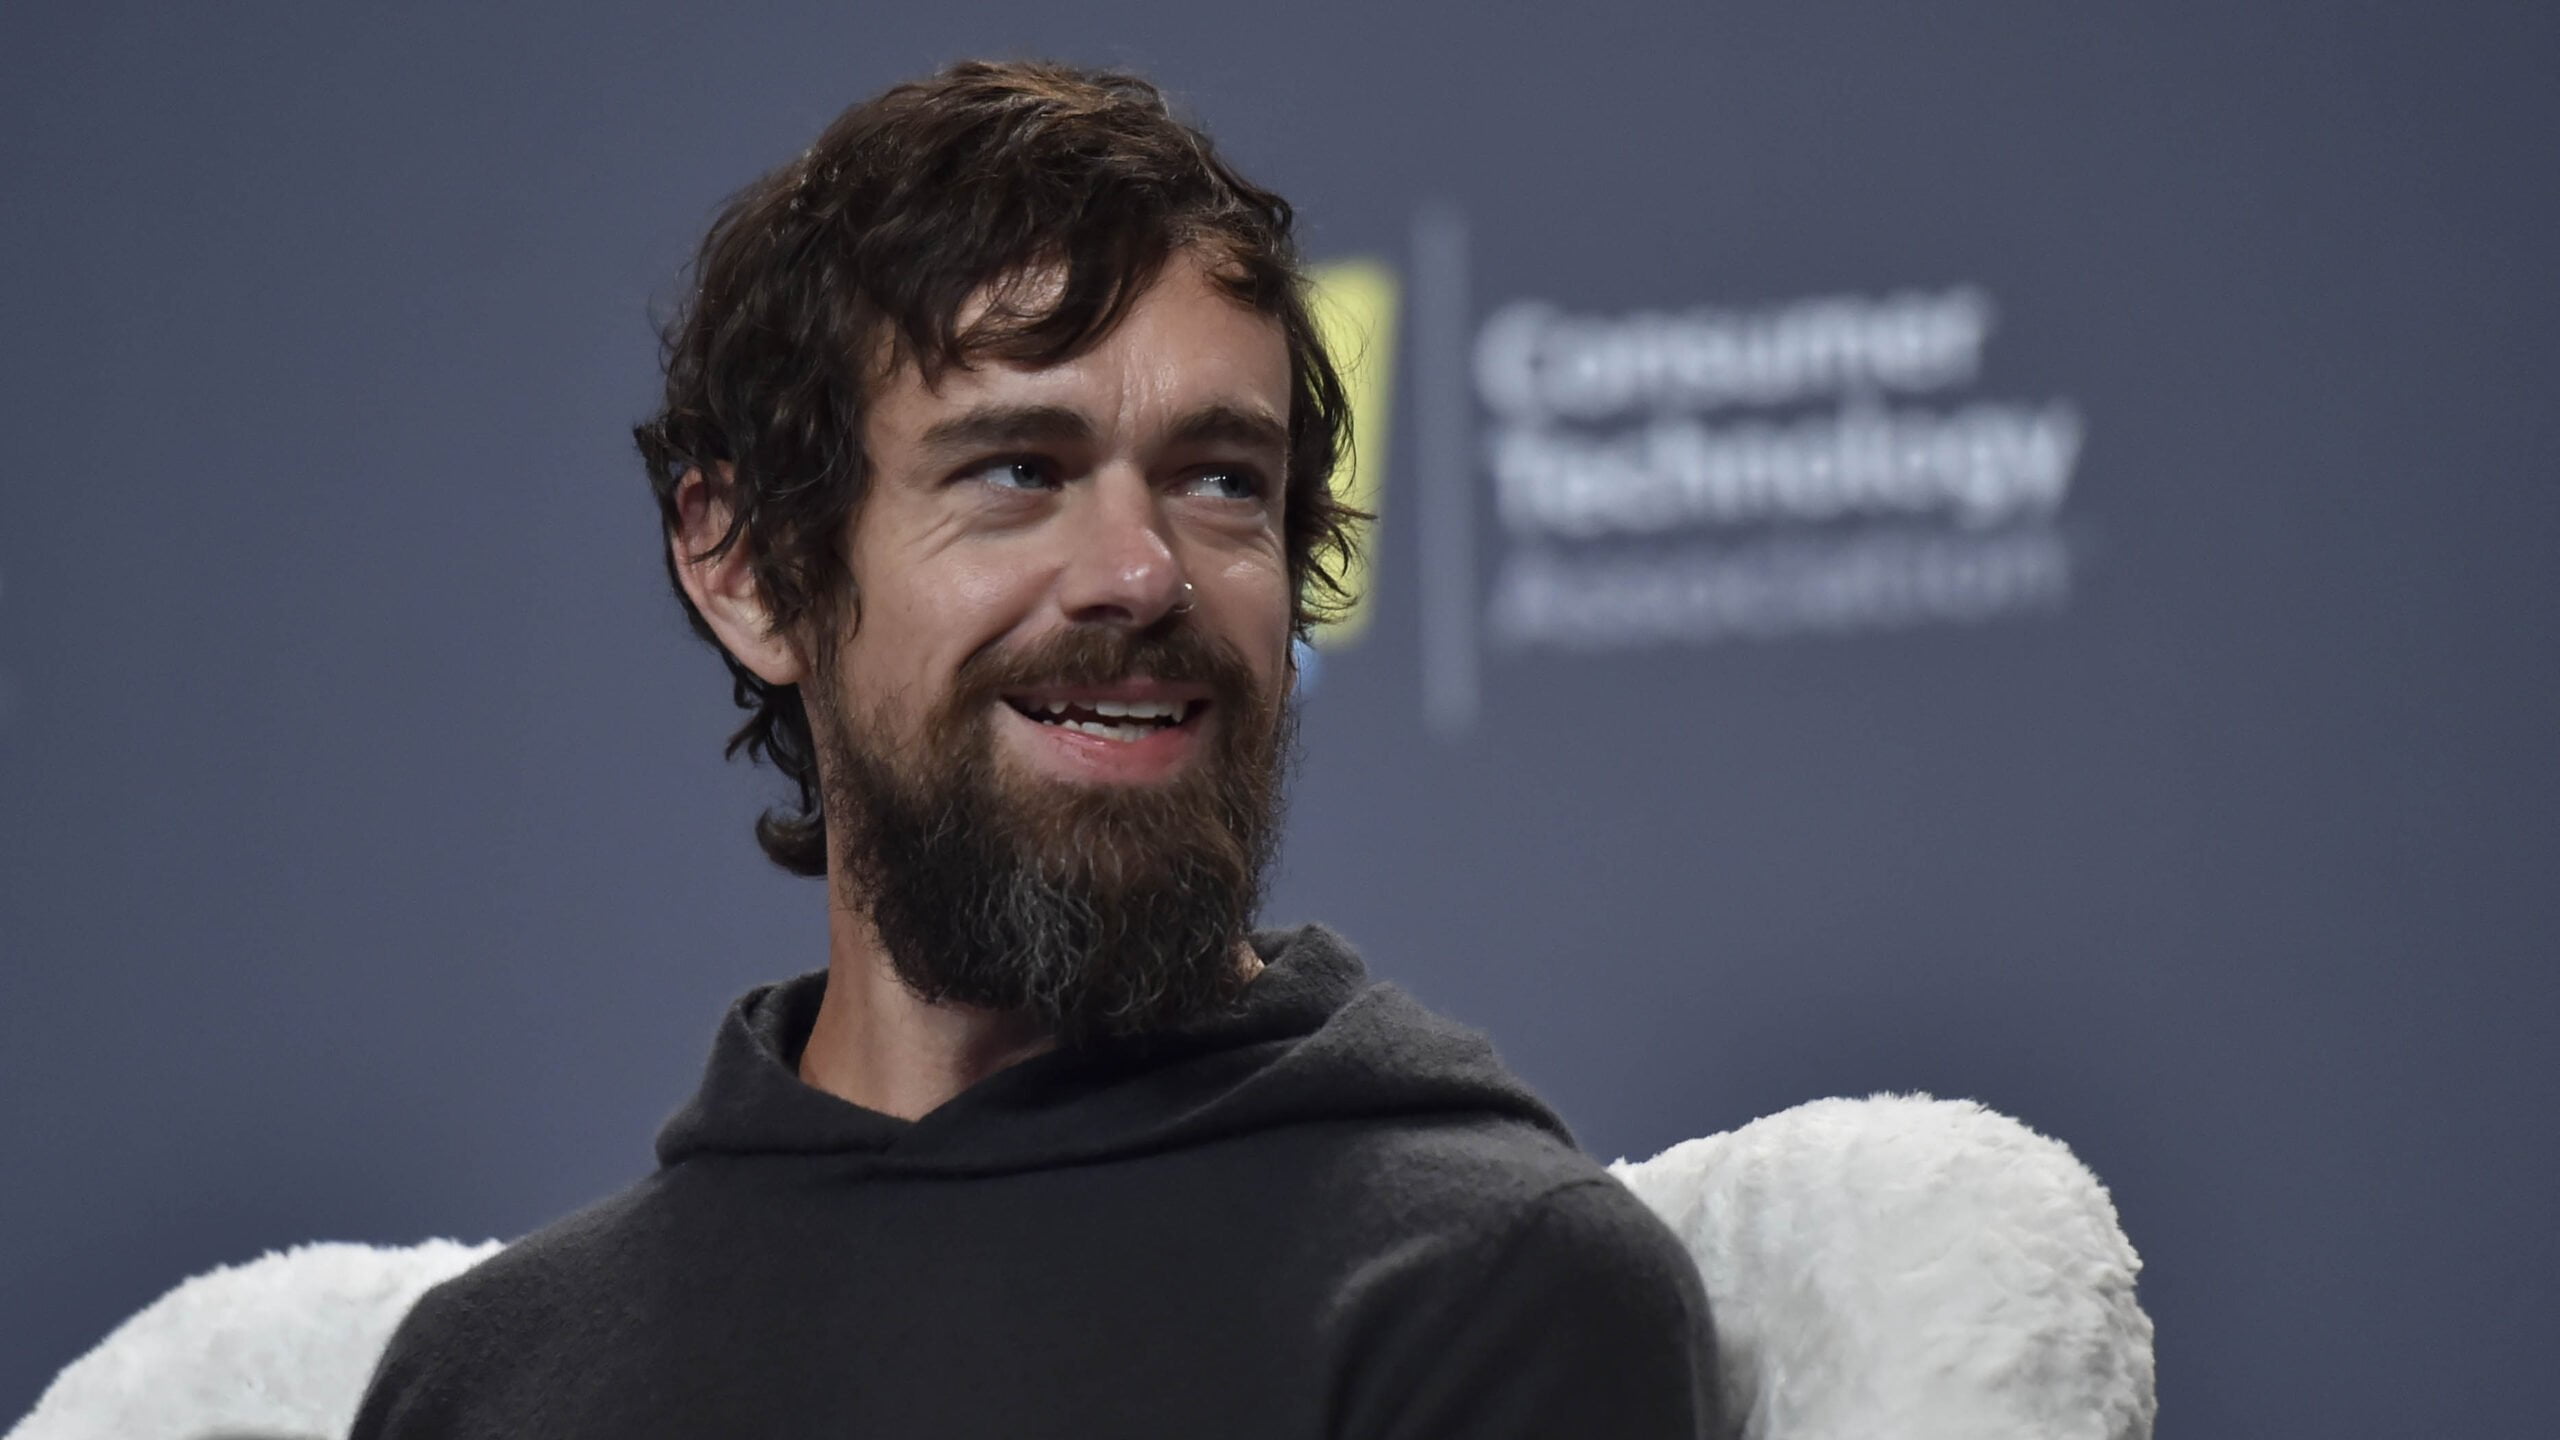 Jack Dorsey's $2.9M worth of "Tweet NFT" is now worth $6 only 4